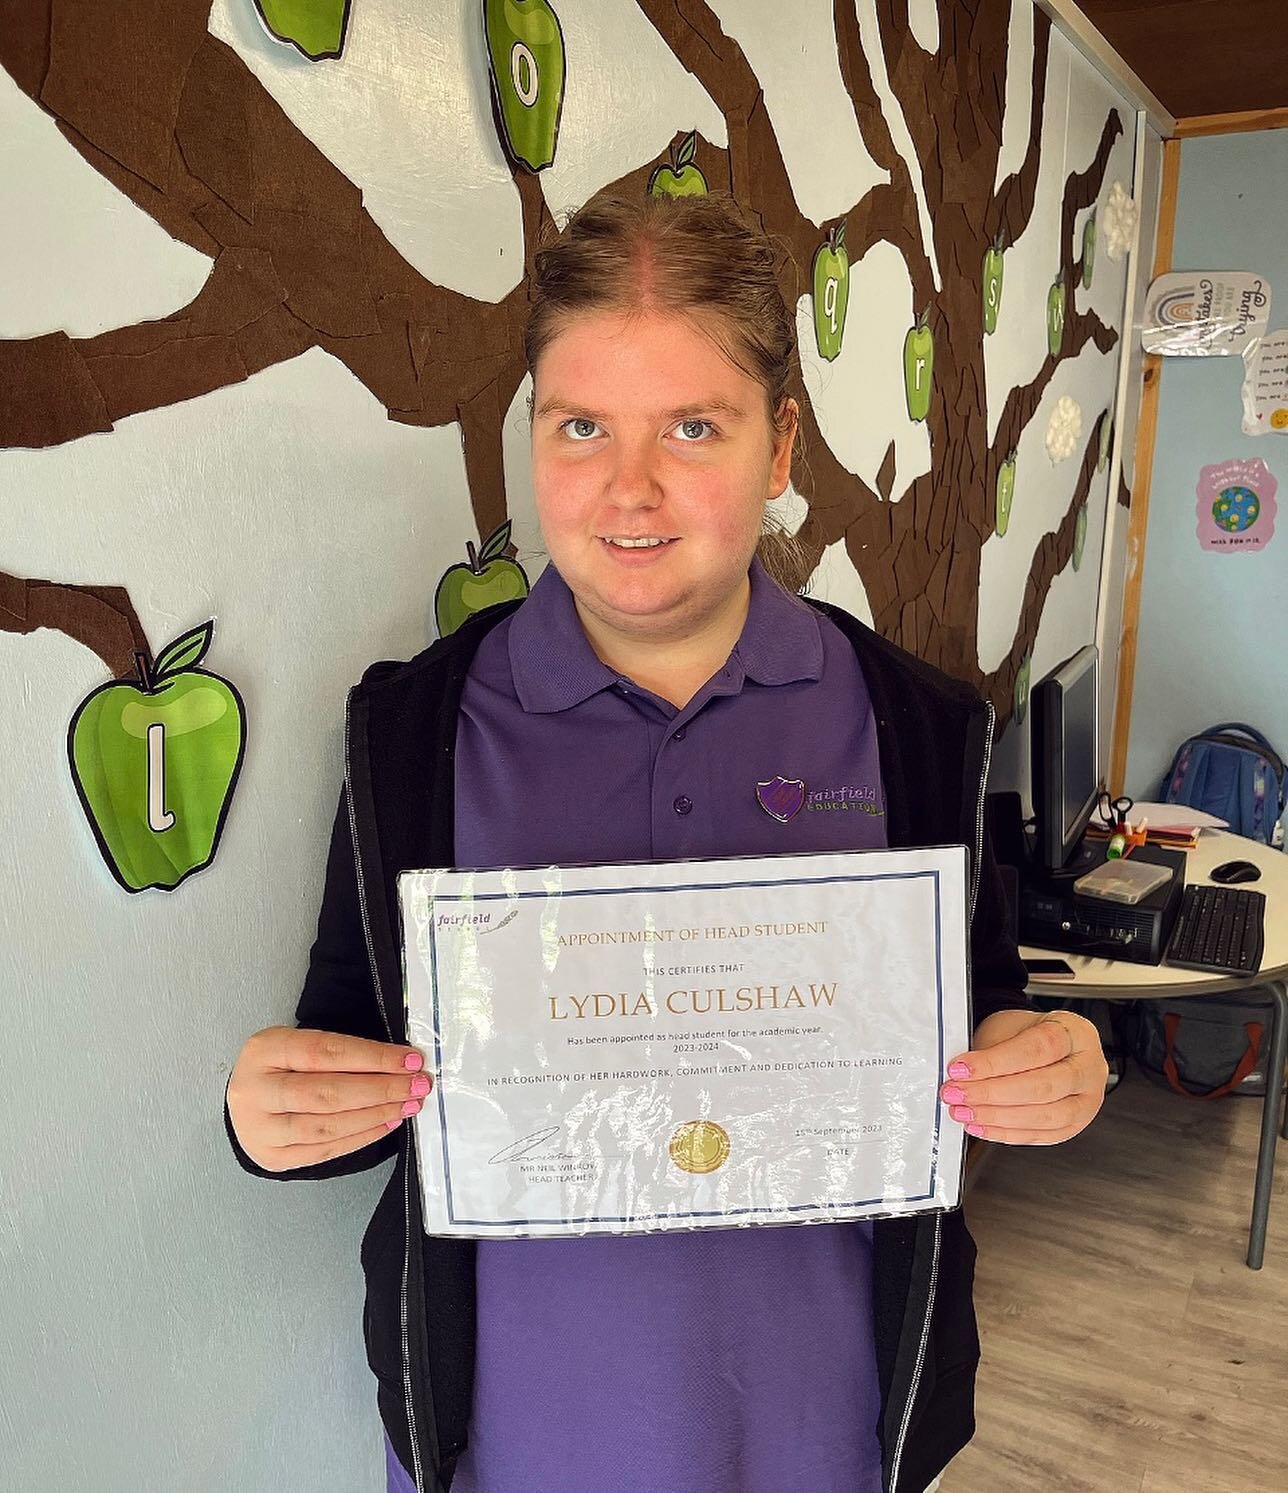 Big news here at Fairfield House School as we announce our Head Pupil for the year and award out certificates and the badge to be worn with pride 

👏👏👏 Amazing Lydia 👏👏👏 well deserved 

#school #awards #farmschool #rural #sen #headpupil #welldo